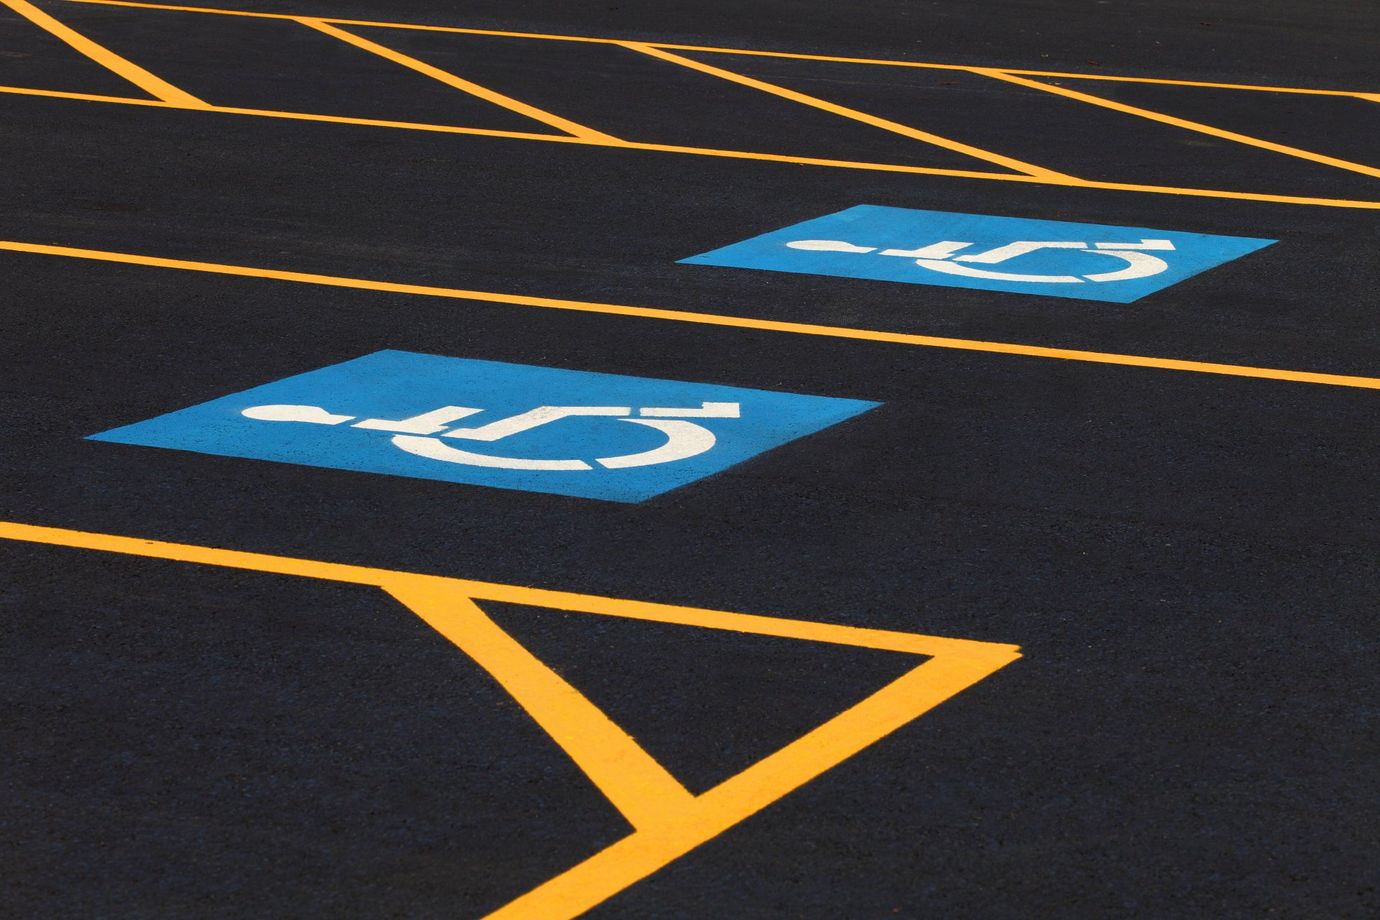 Parking Lot with Handicap Markings